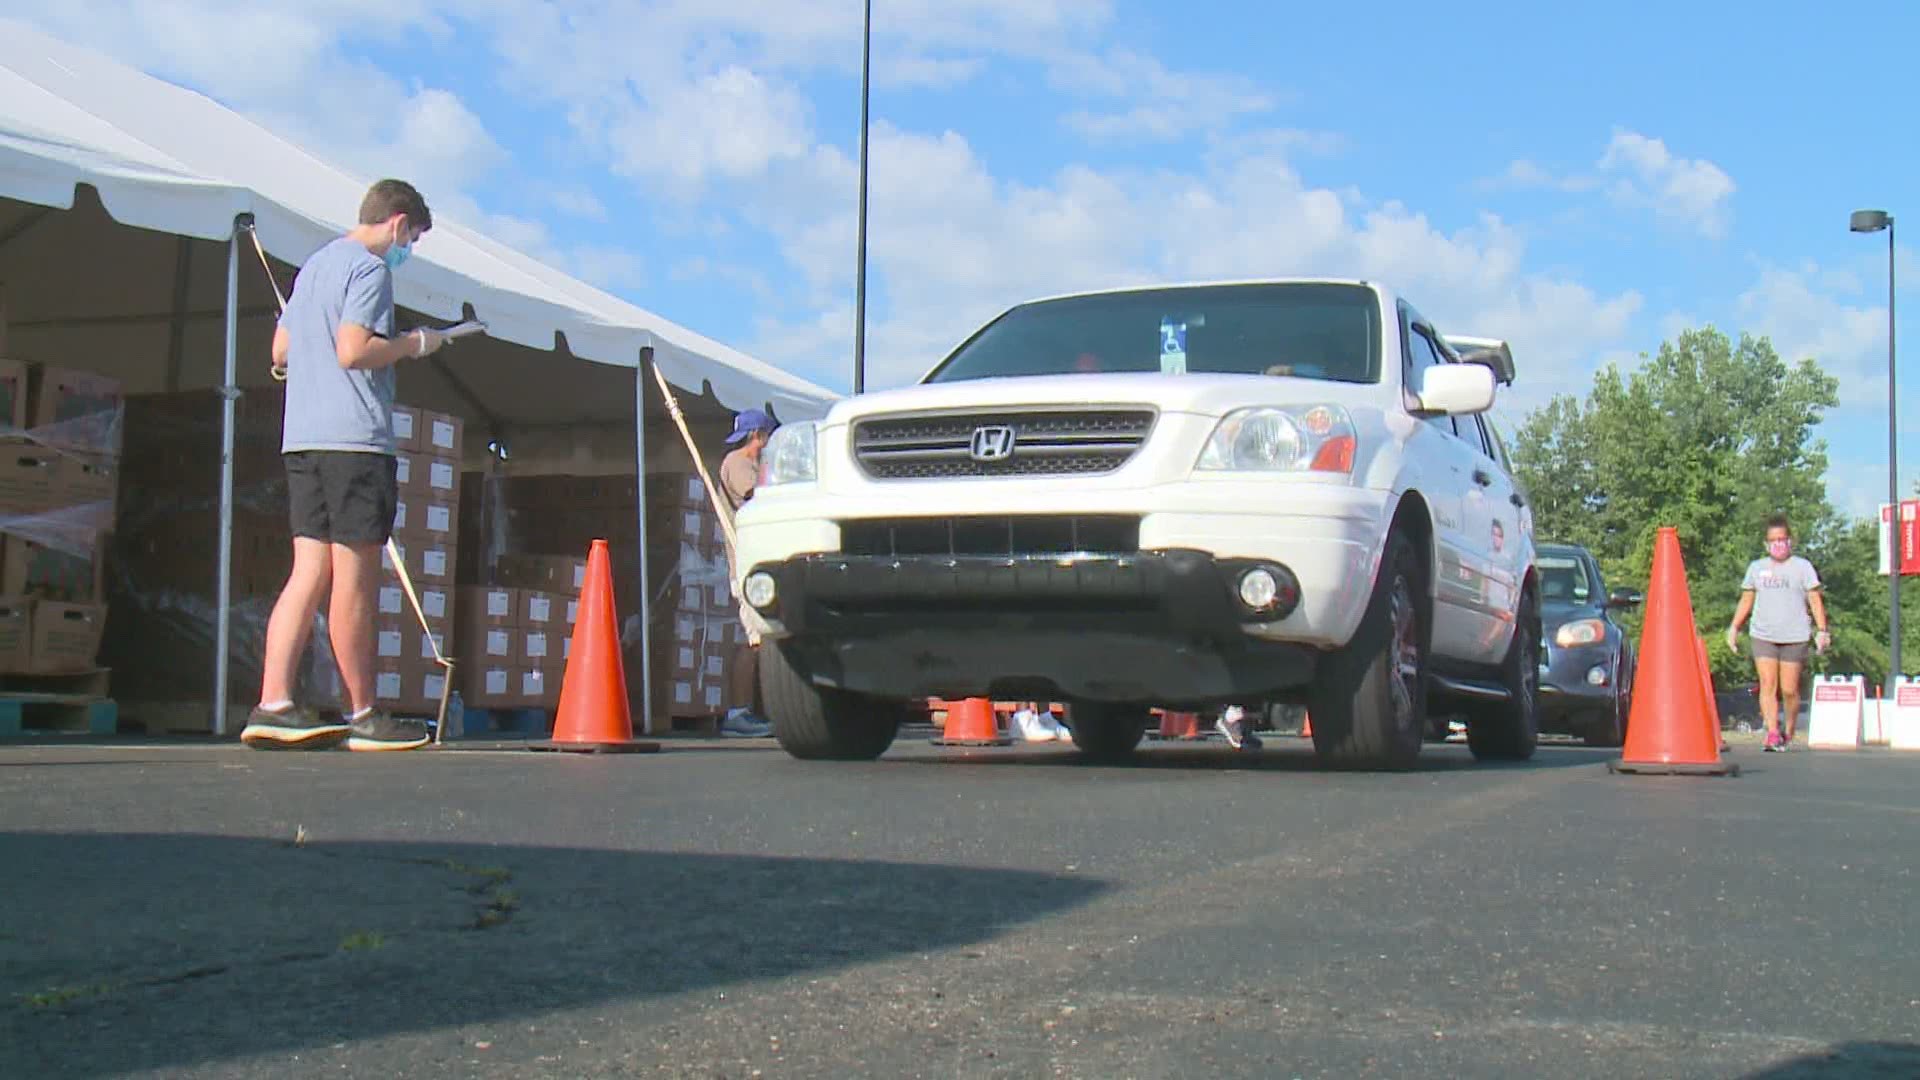 For months now, Foodshare has been handing out food across the state, including at Rentschler Field in East Hartford, for families in need